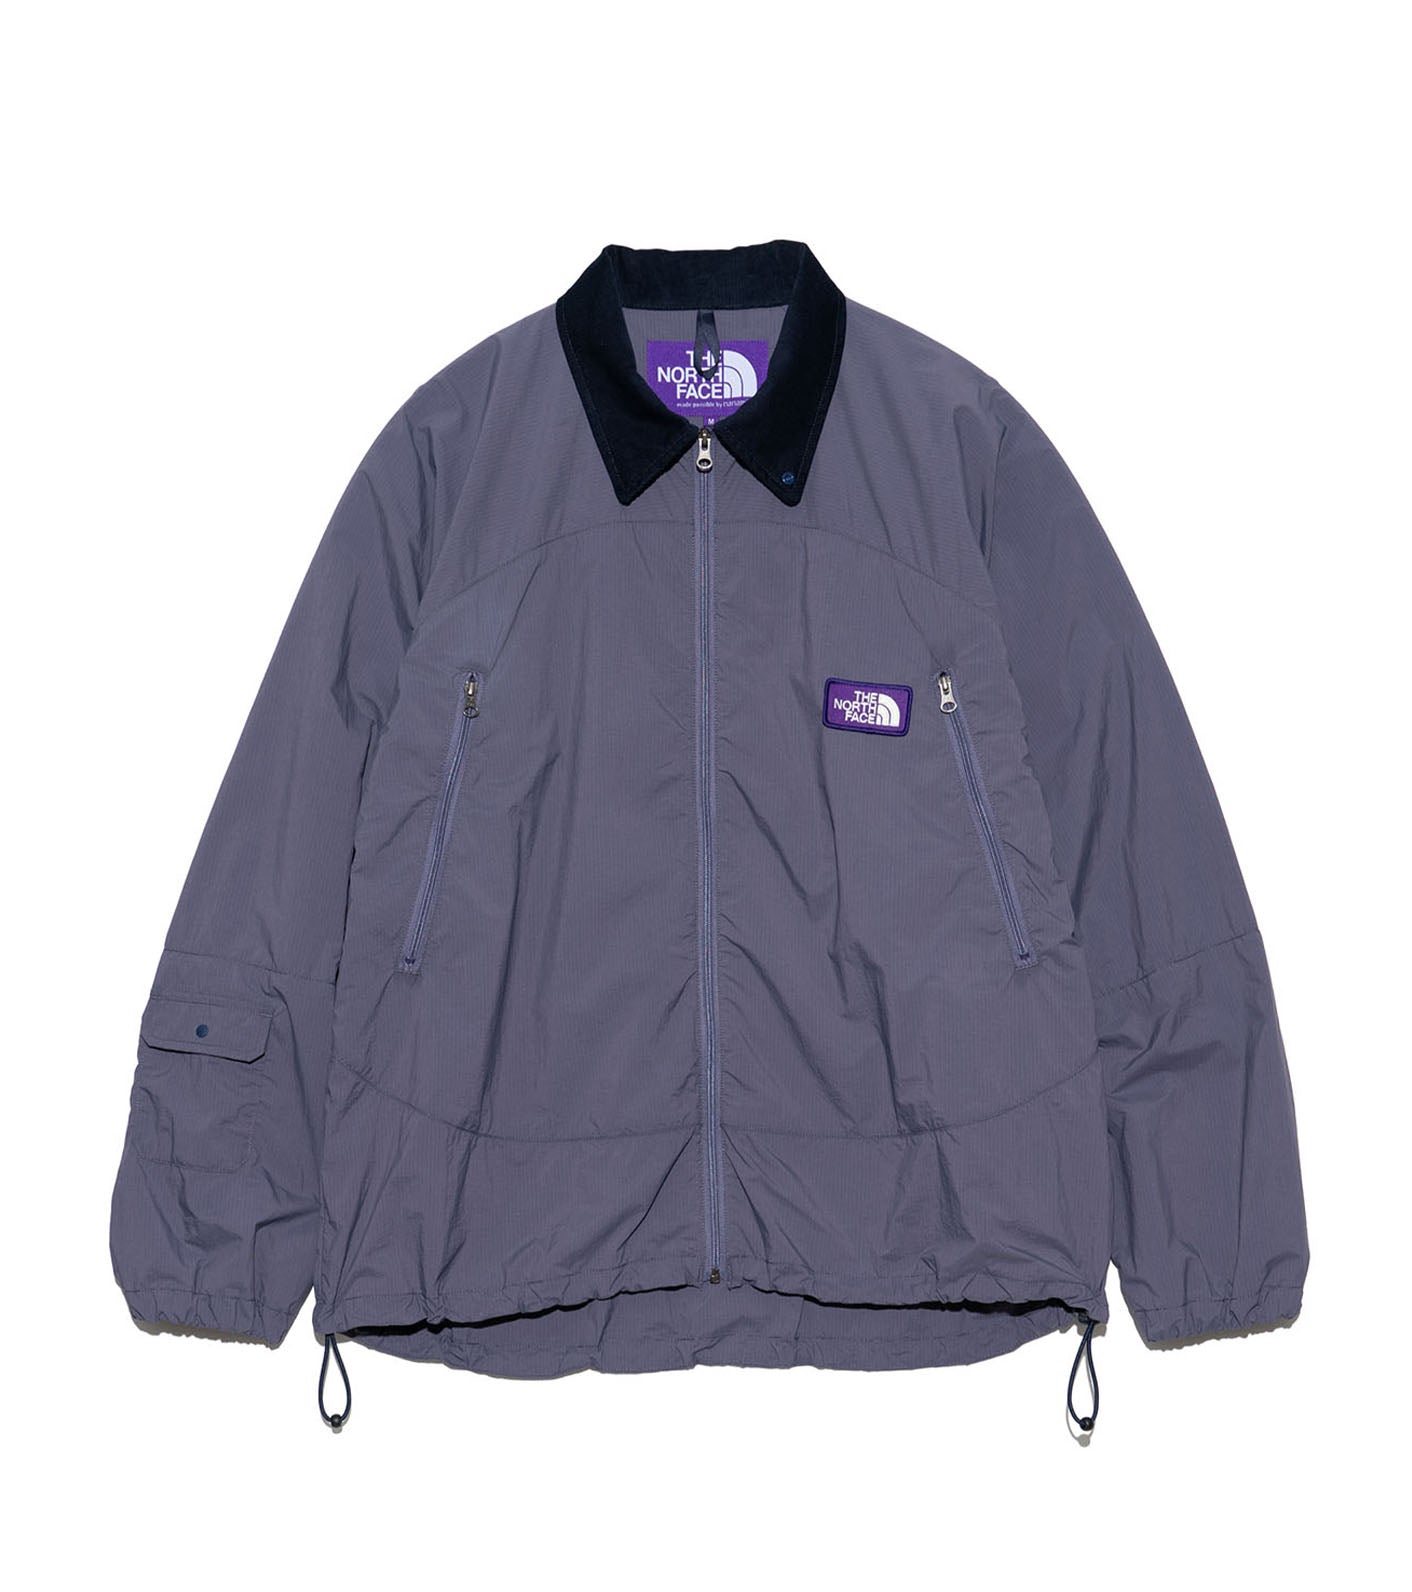 THE NORTH FACE PURPLE LABEL – unexpected store